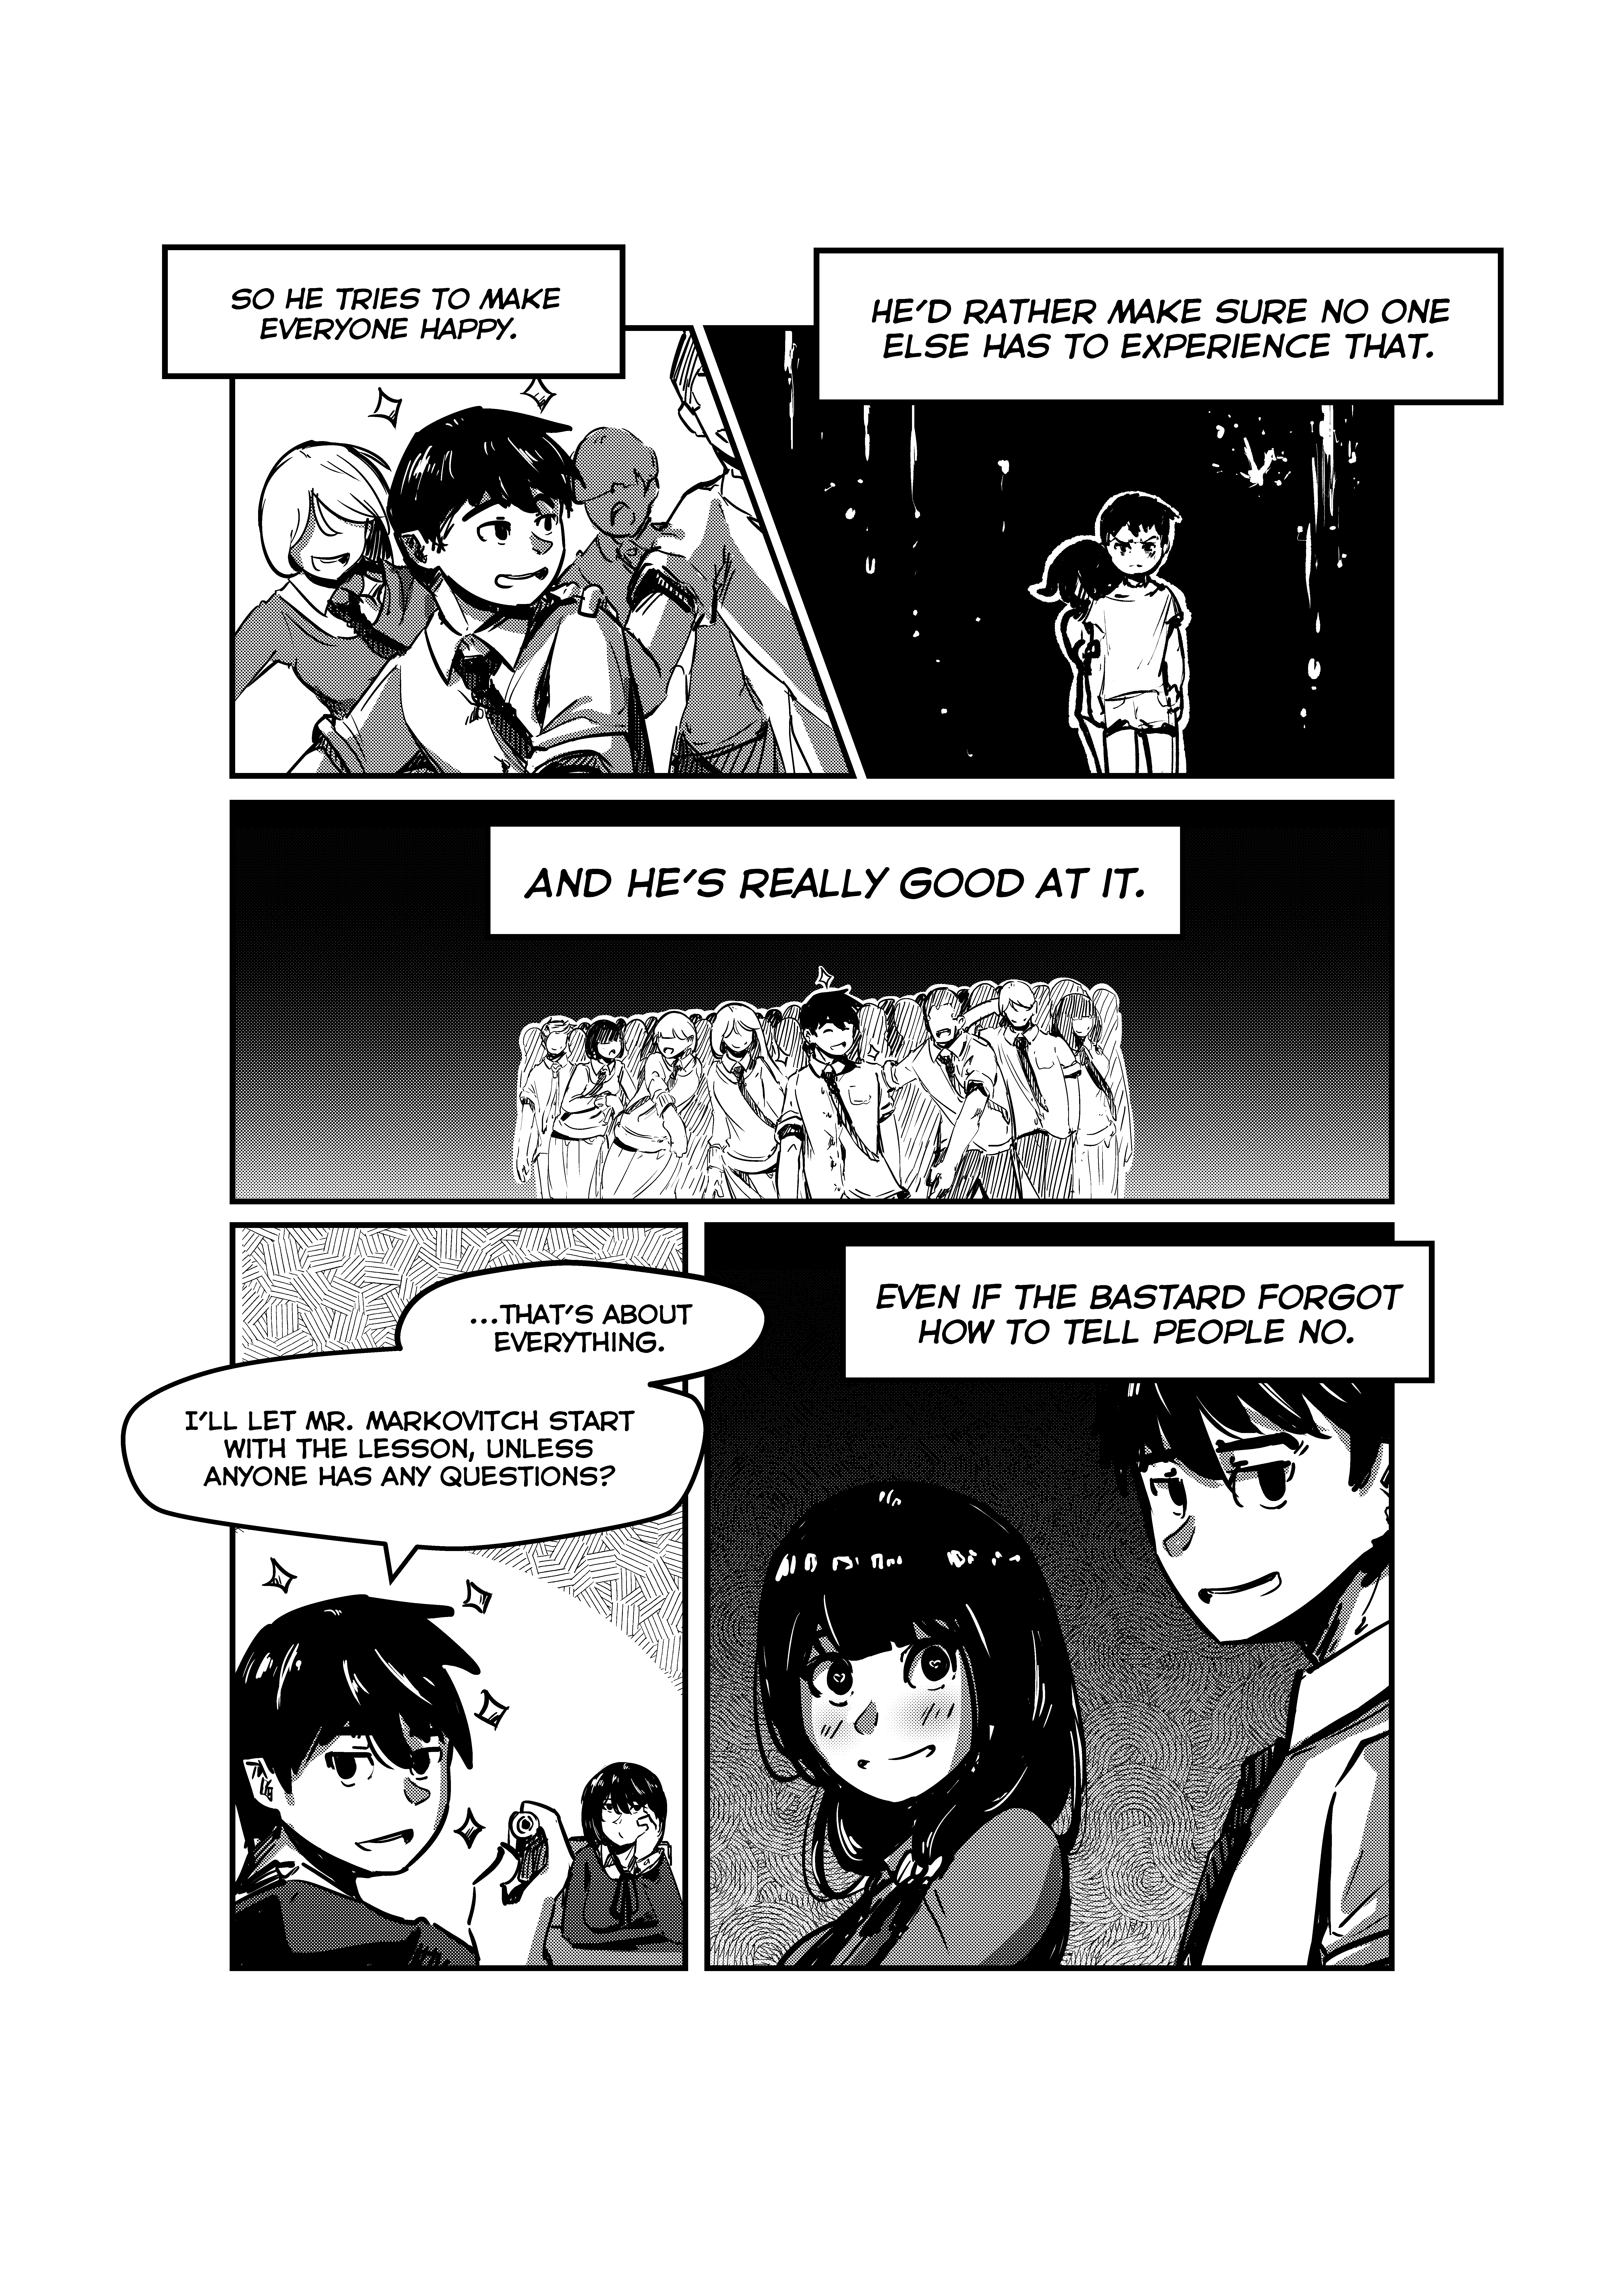 Opposites In Disguise - 11 page 6